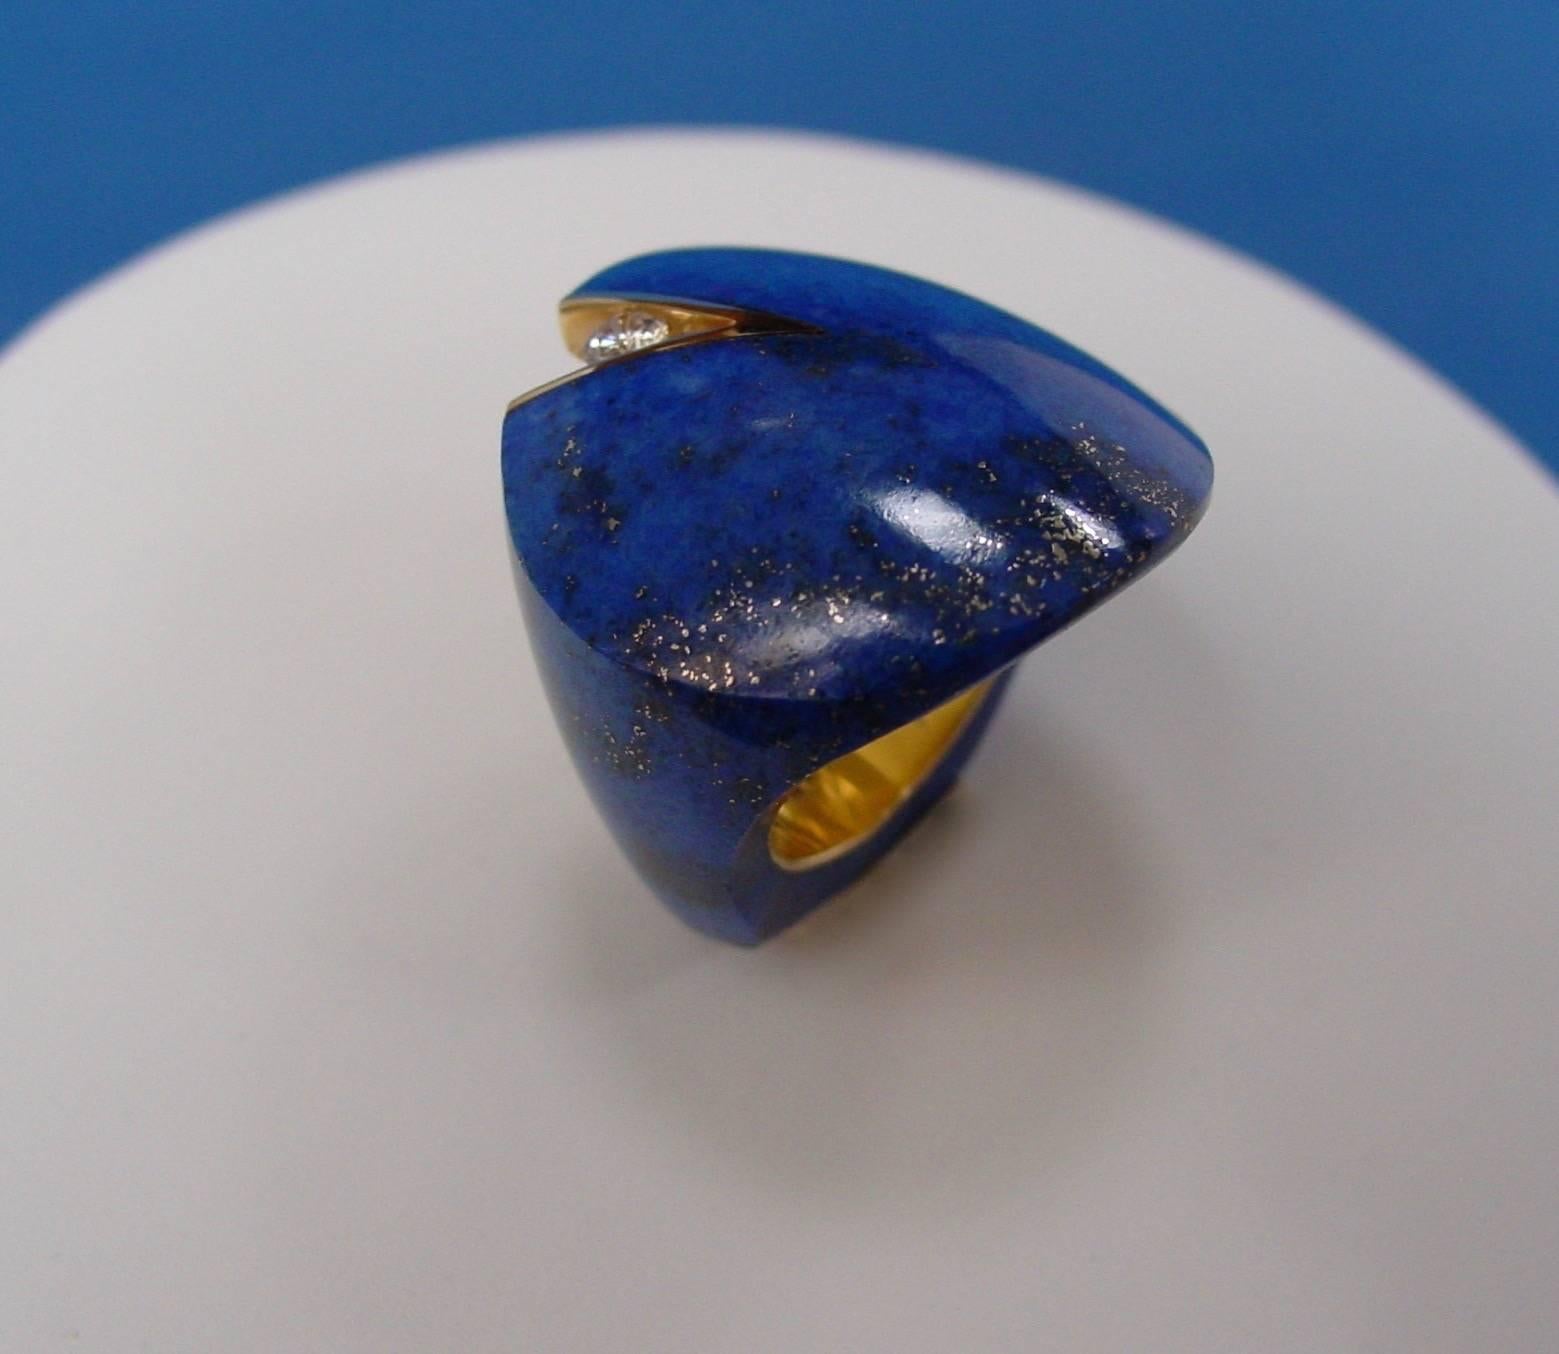 This unique and very lovely ring is composed of a single carved piece of lapis lazuli, lined in 18 karat yellow gold and artfully accented by a round brilliant diamond. Engraved 750 BDW
Ring is sized 7 1/2 and is not sizable
Approximate diamond